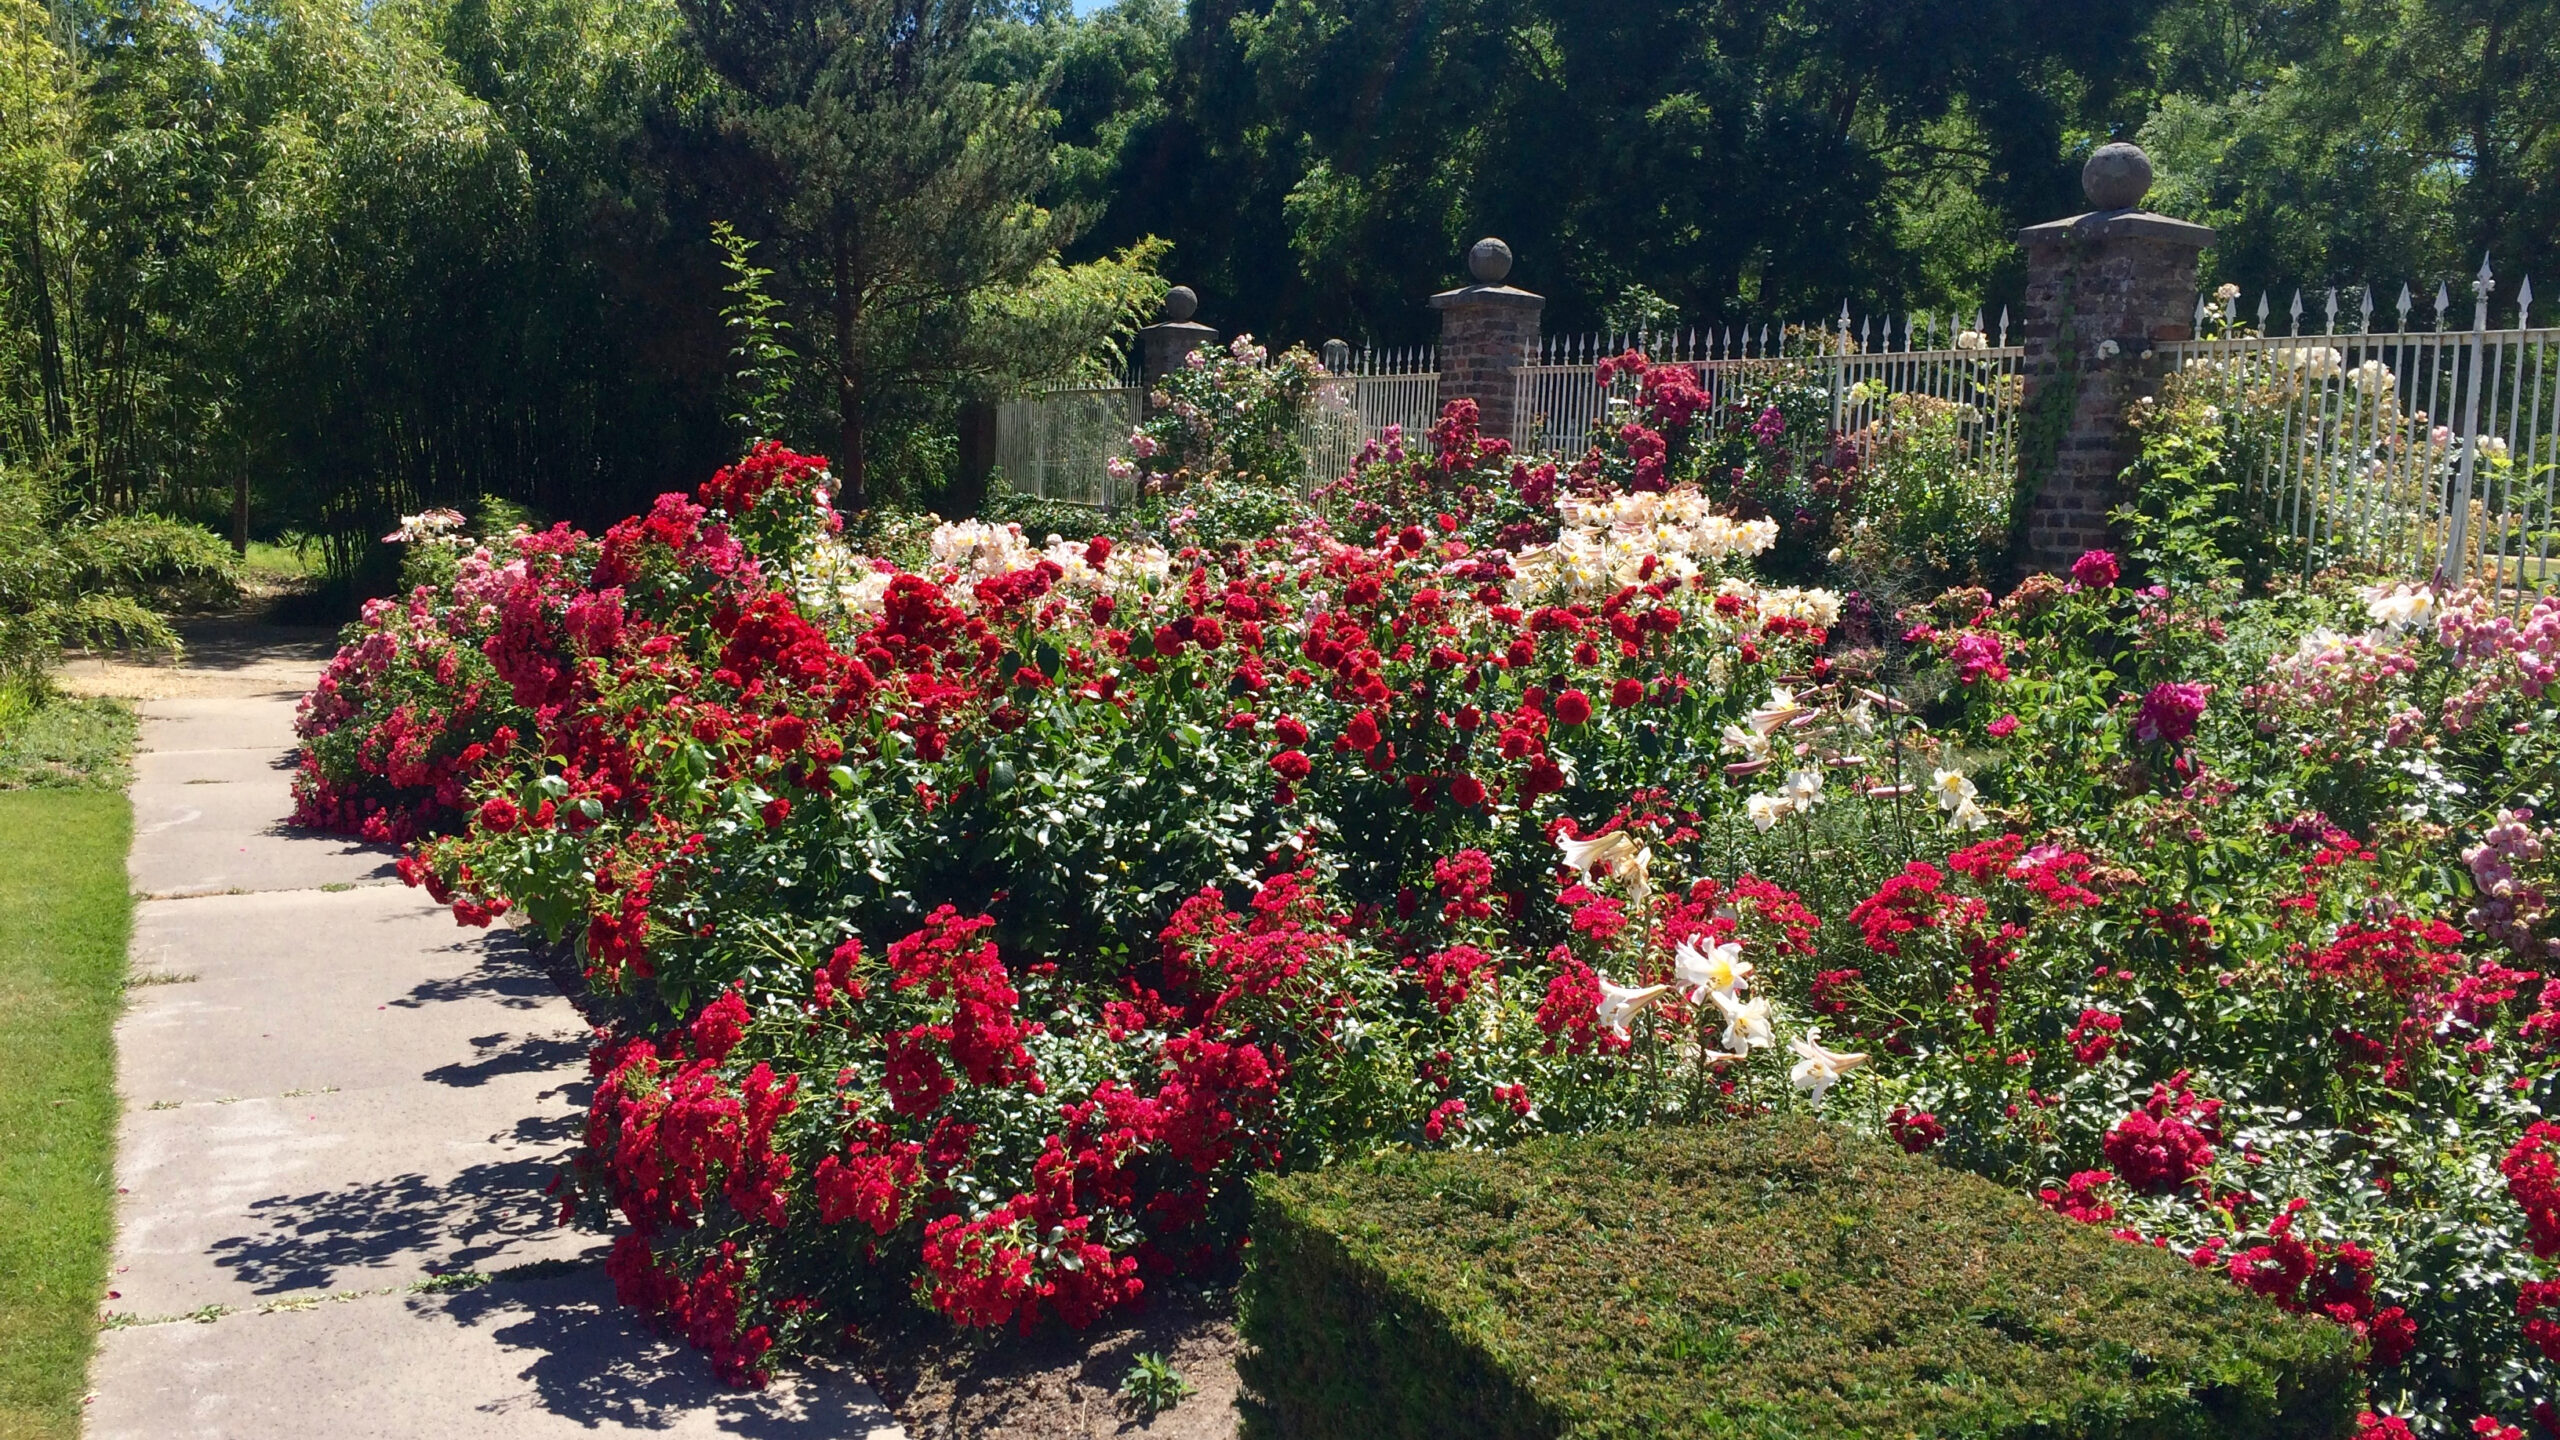 Lots of roses in the gardens at Schloss Dyck